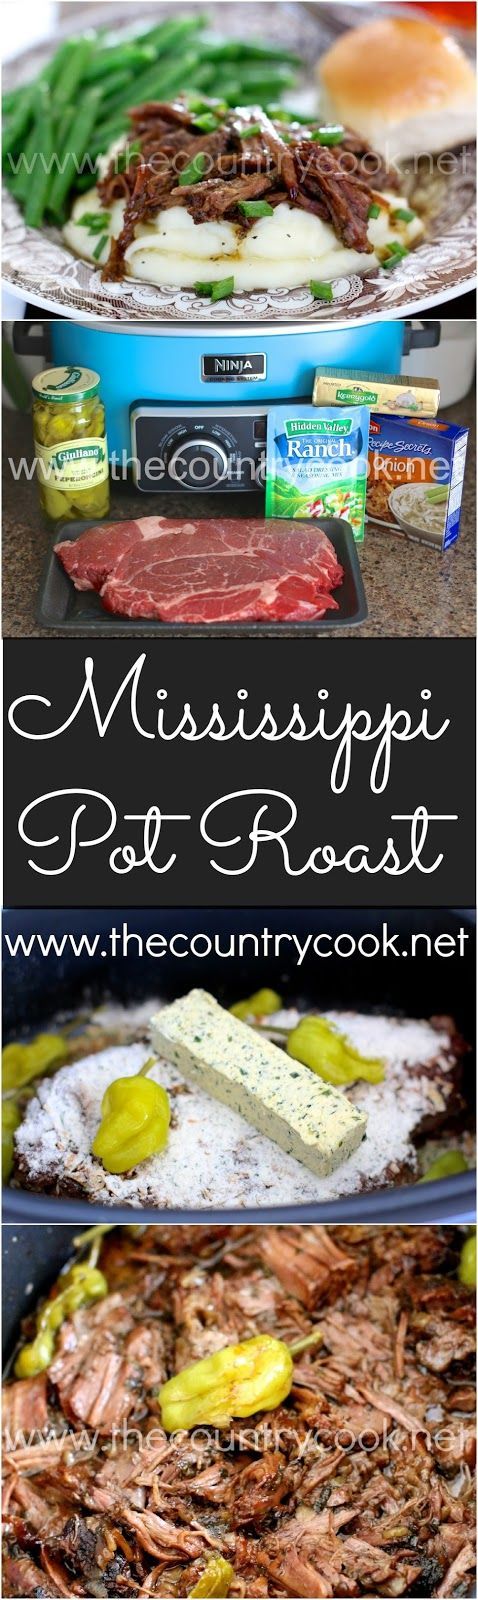 Crock Pot Mississippi Pot Roast recipe from The Country Cook – the most amazing roast I think I have ever made!